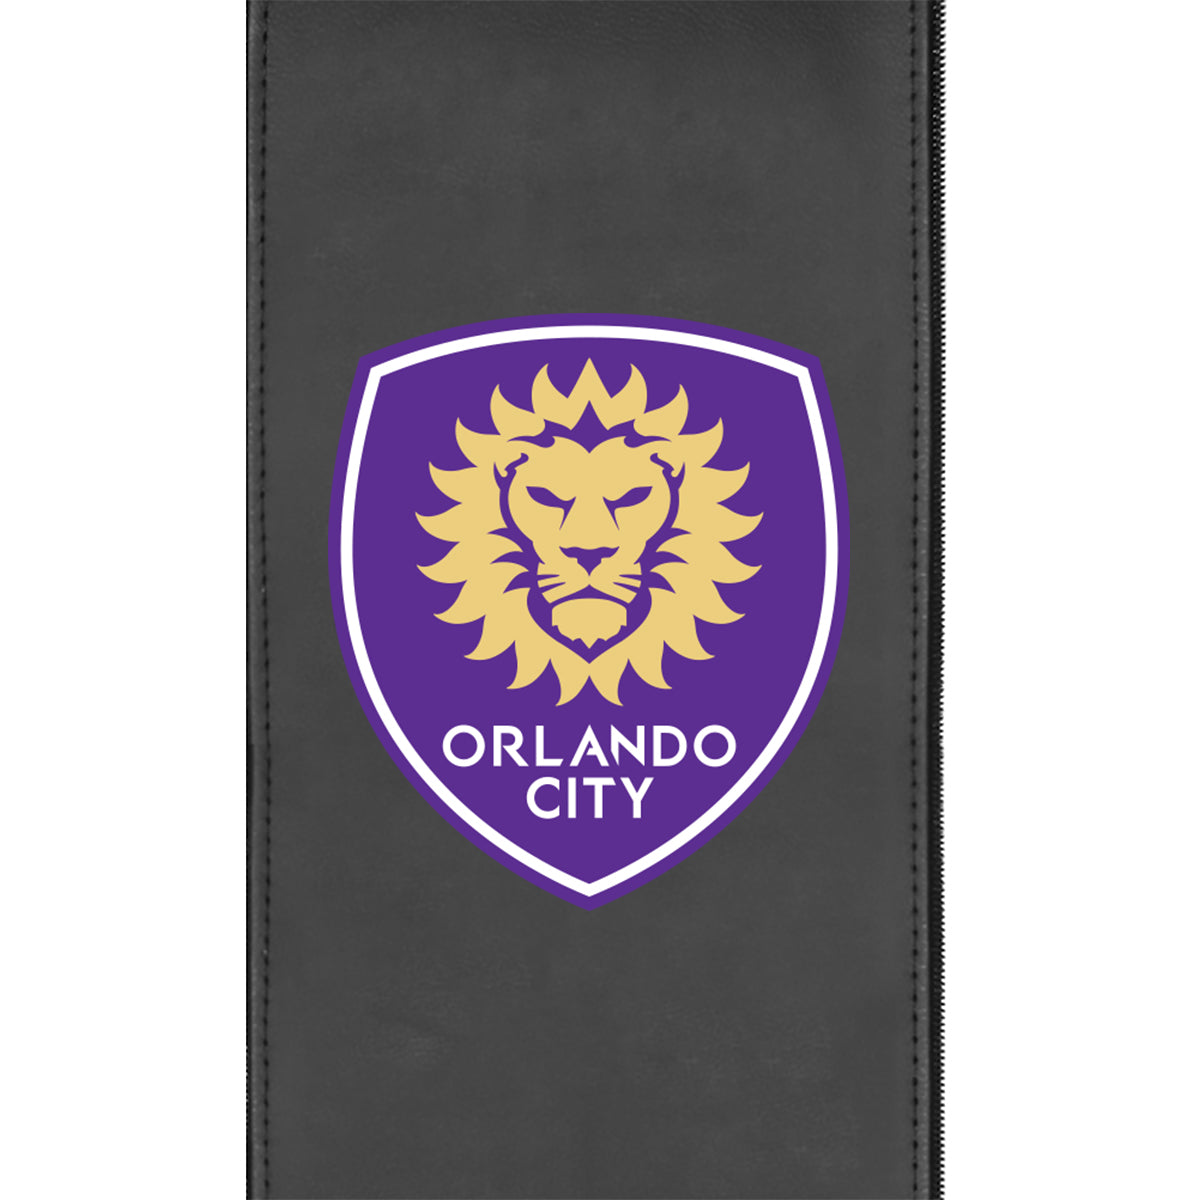 Relax Home Theater Recliner with Orlando City FC Logo